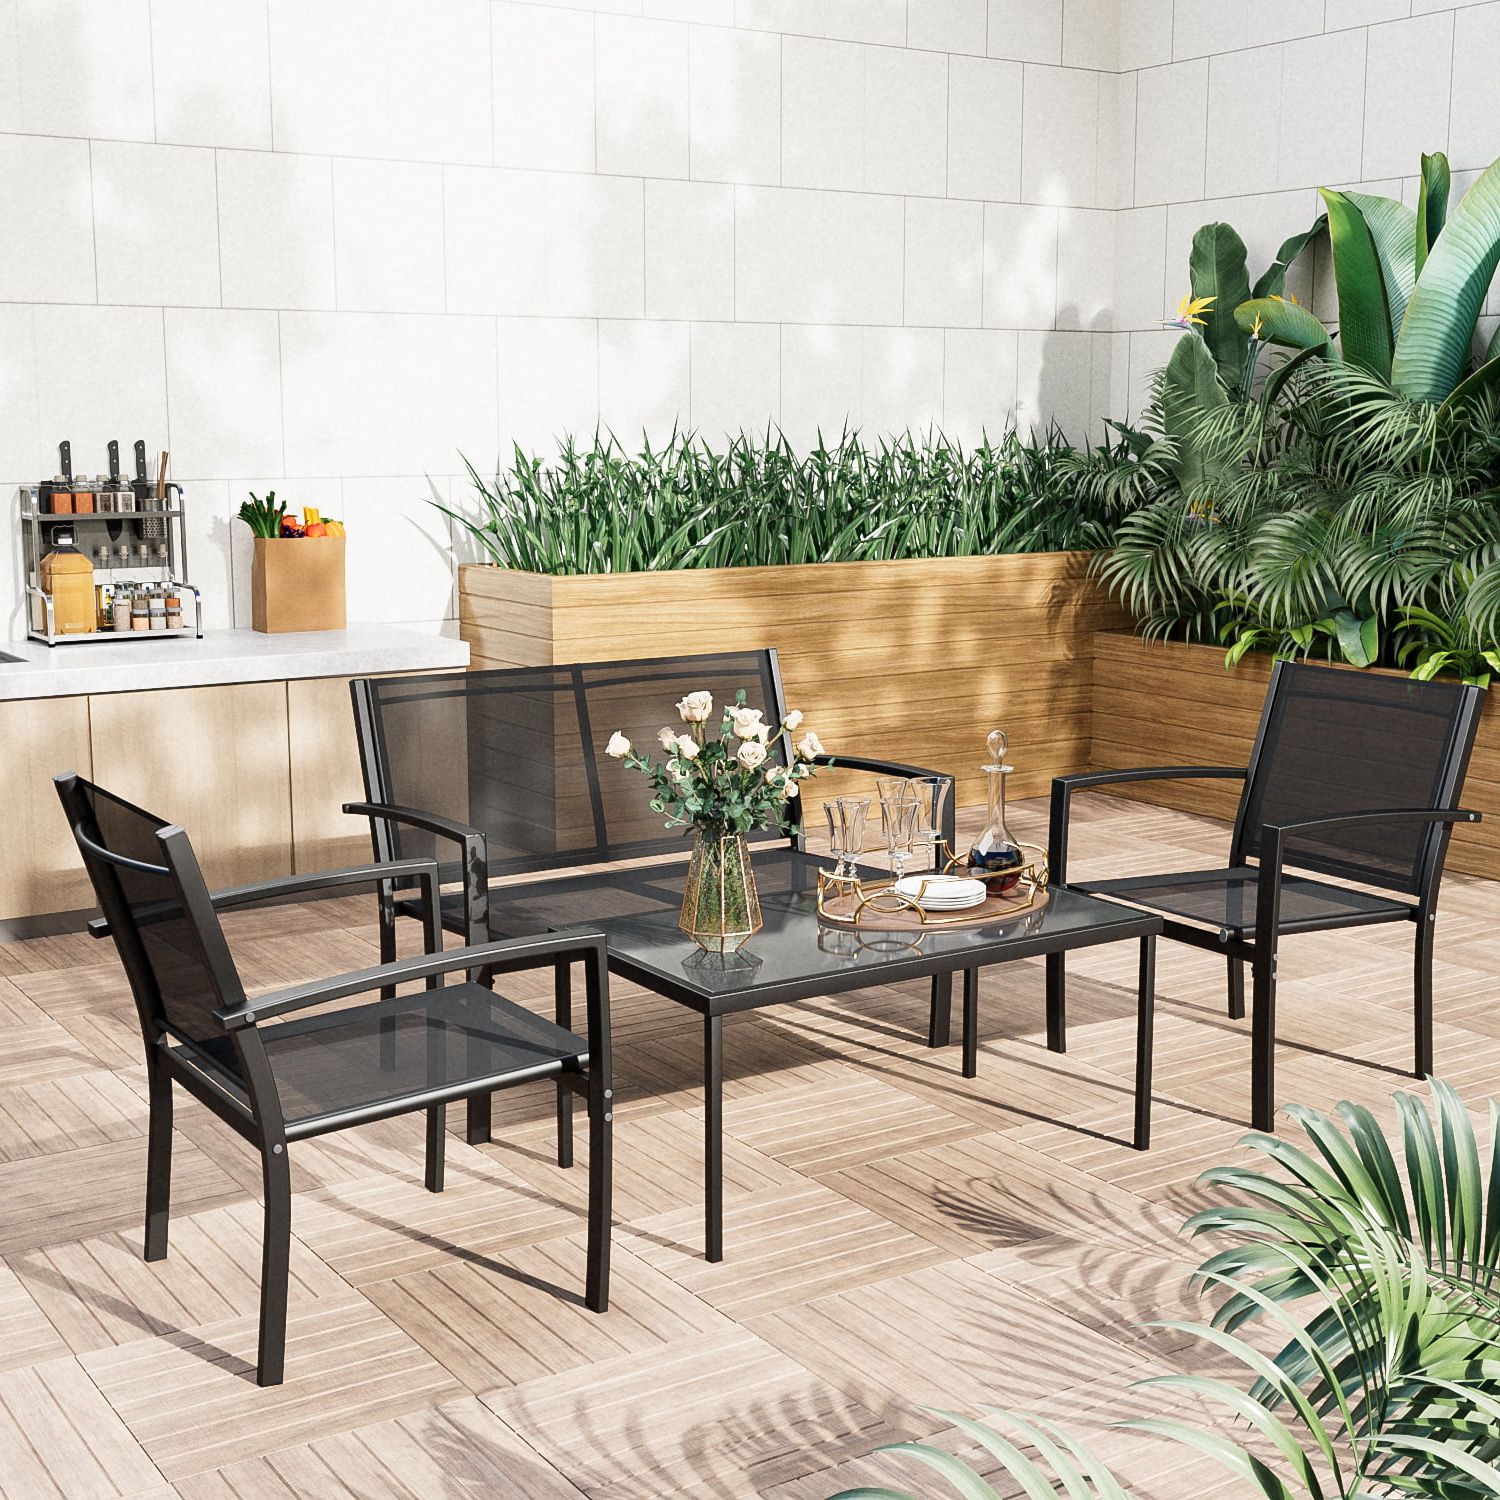 Textilene Bistro Set Modern Conversation Set In Popular Lacoo 4 Pieces Patio Indoor Furniture Outdoor Patio Furniture Set Textilene  Bistro Set Modern Conversation Set Black Bistro Set With Loveseat Tea Table  For Home, Lawn And Balcony, Black – Walmart (Photo 1 of 15)